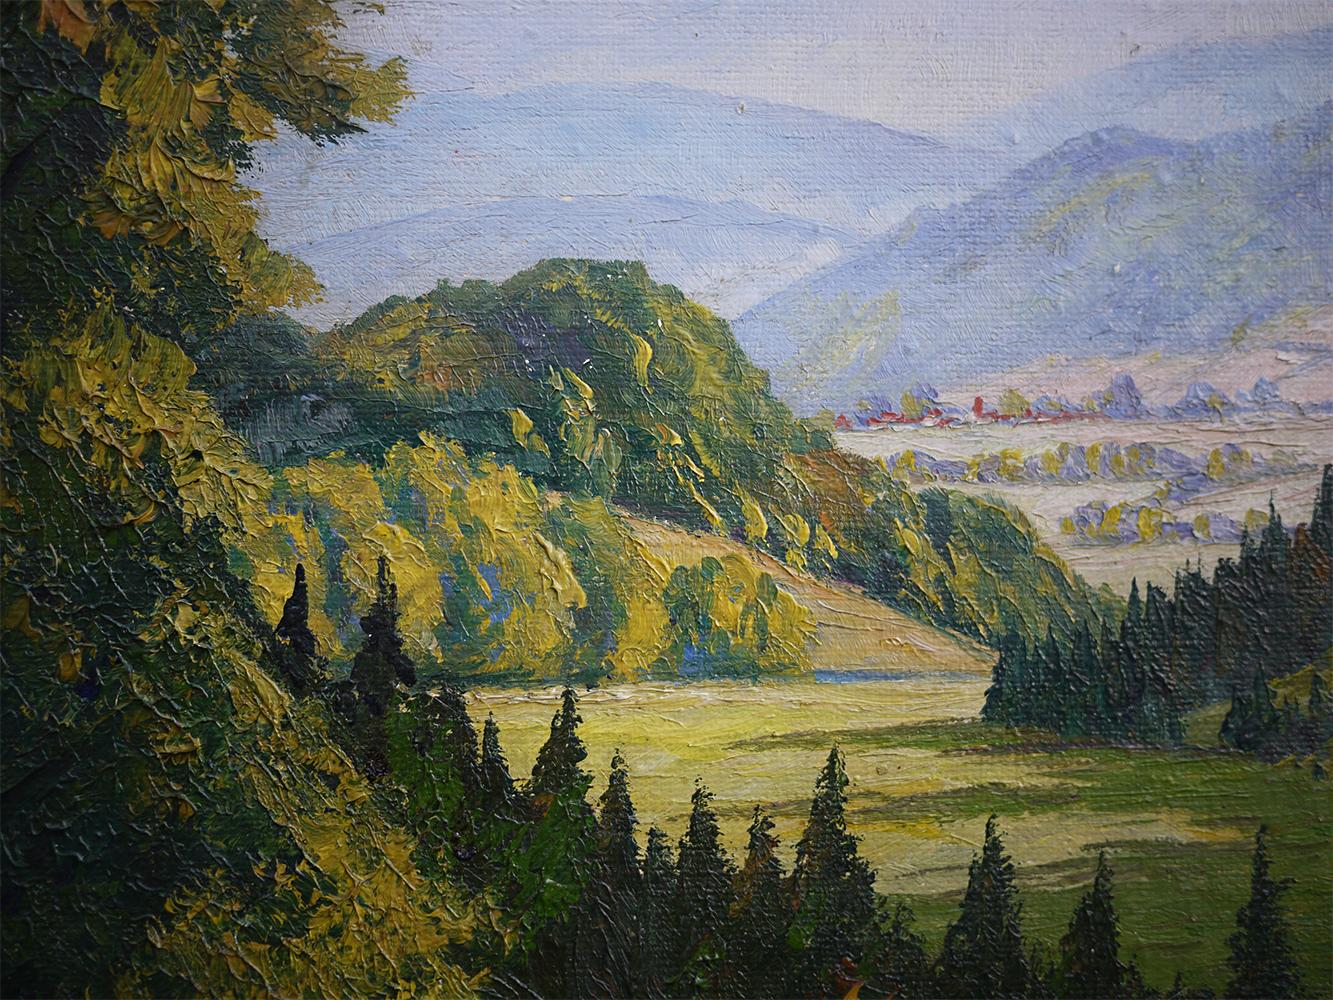 Hilly Landscape Nature Painting Italian Oil on Canvas 1930 For Sale 1